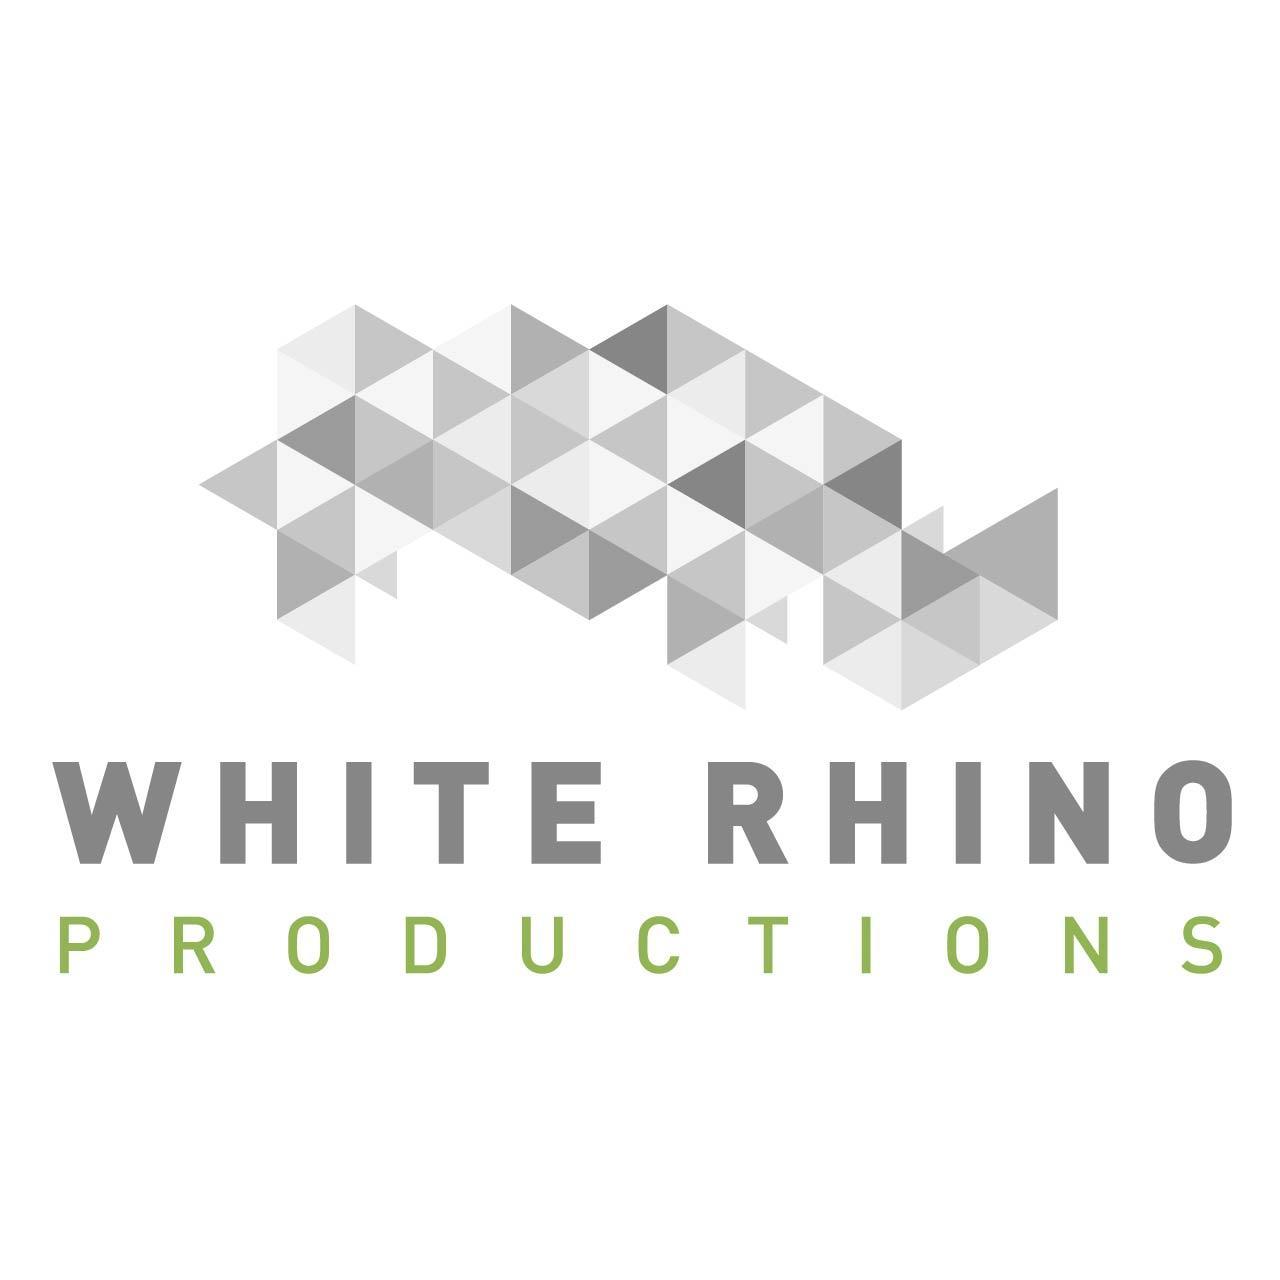 At White Rhino Productions we're all about branding, be it; #Video, #Photo, #Film or #Web. We work with you, turning our creativity into your content. #WRP